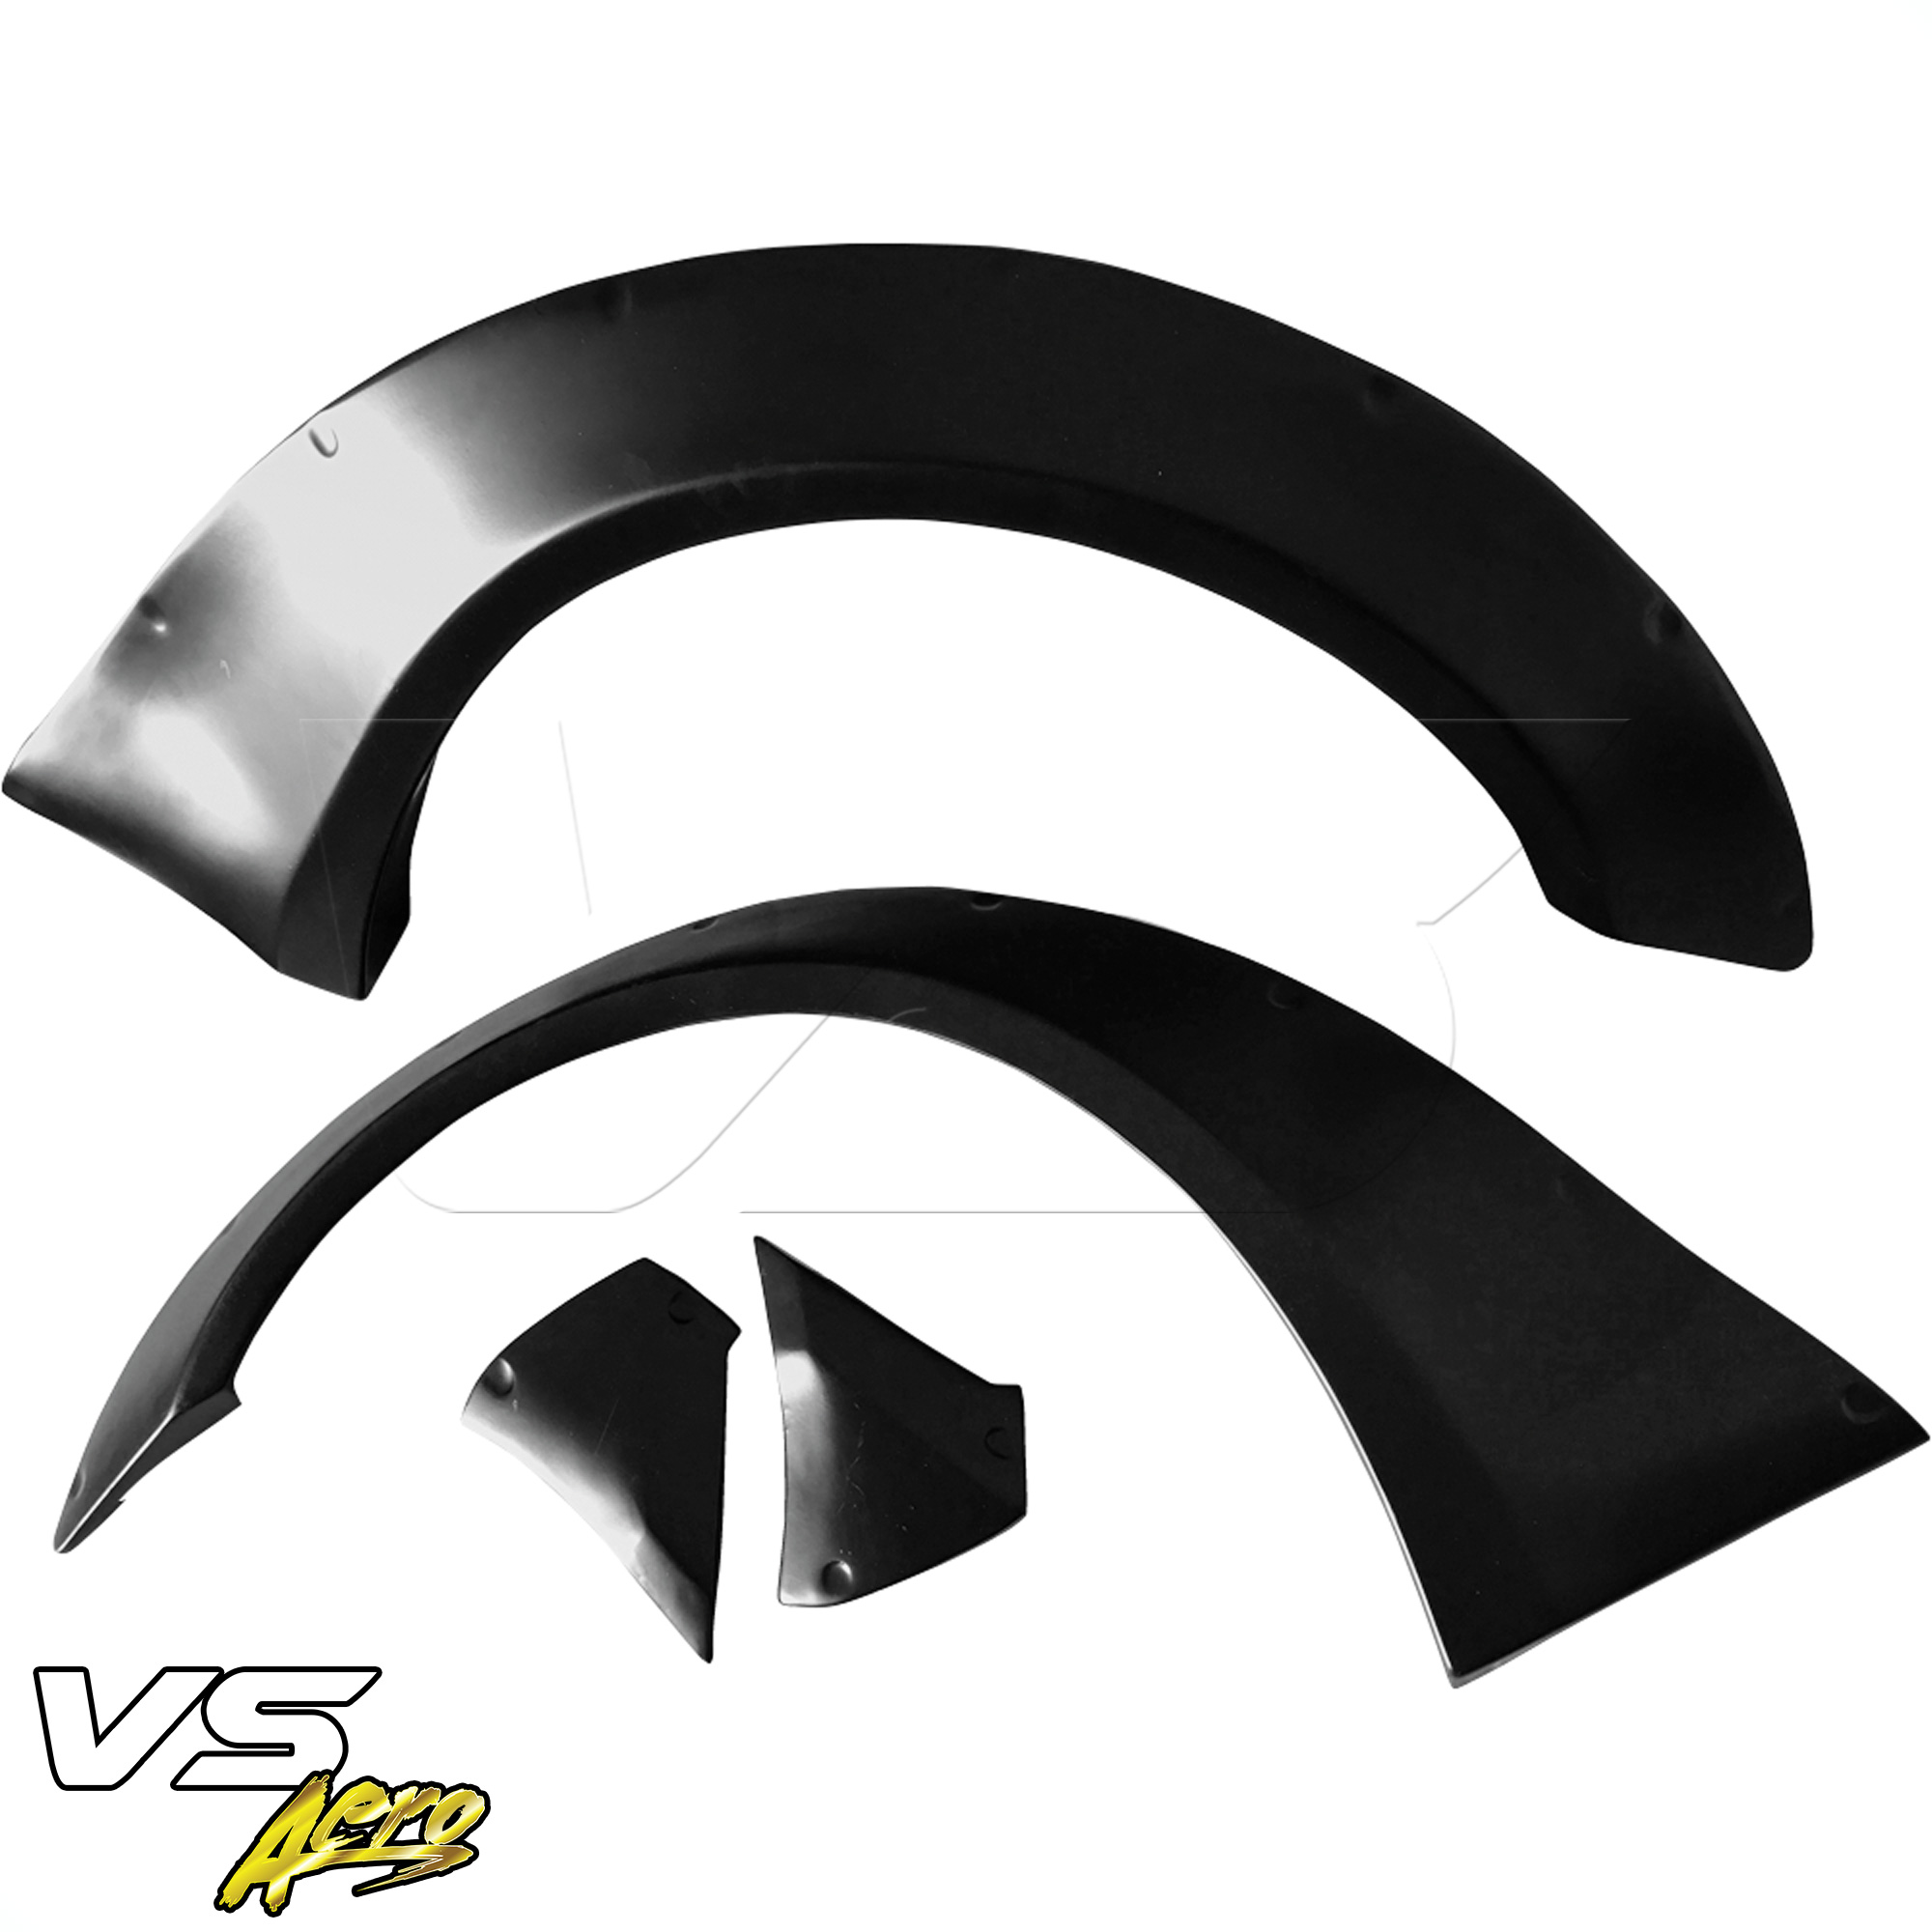 VSaero FRP LBPE Wide Body Fender Flares (front) 4pc > Infiniti G37 Coupe 2008-2015 > 2dr Coupe - Image 7